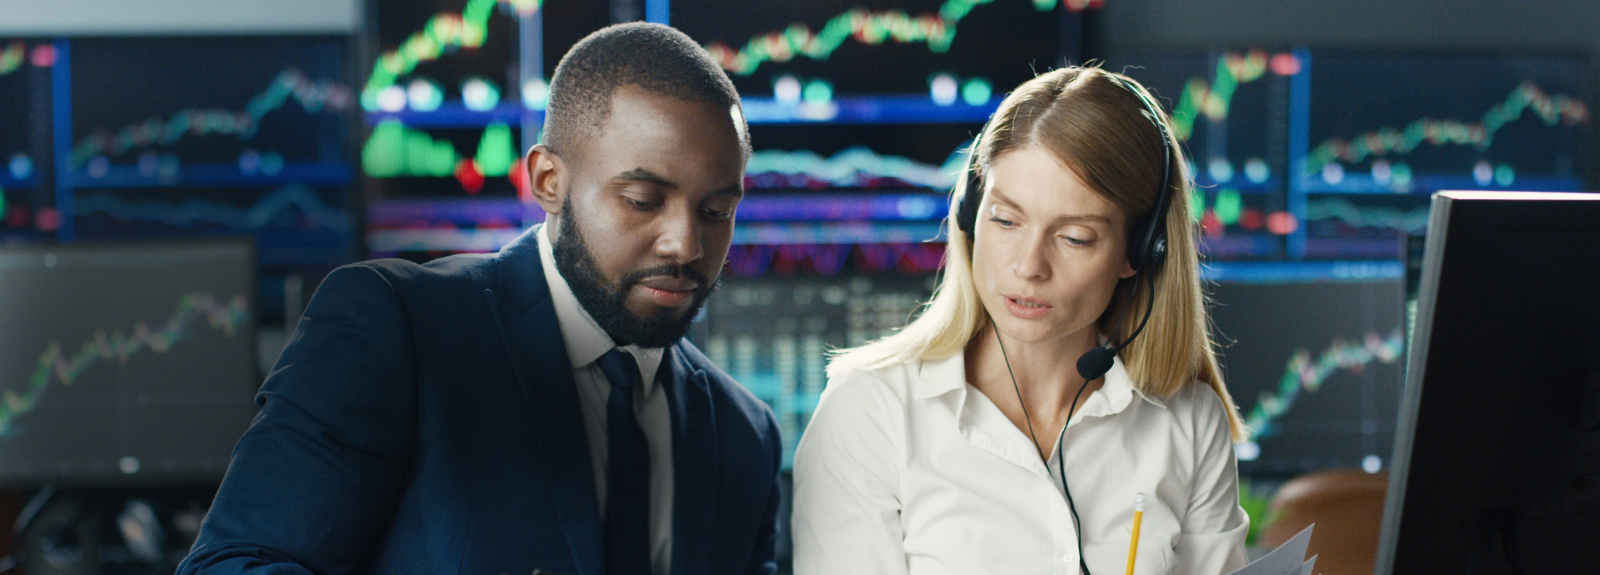 male and female working at stock exchange